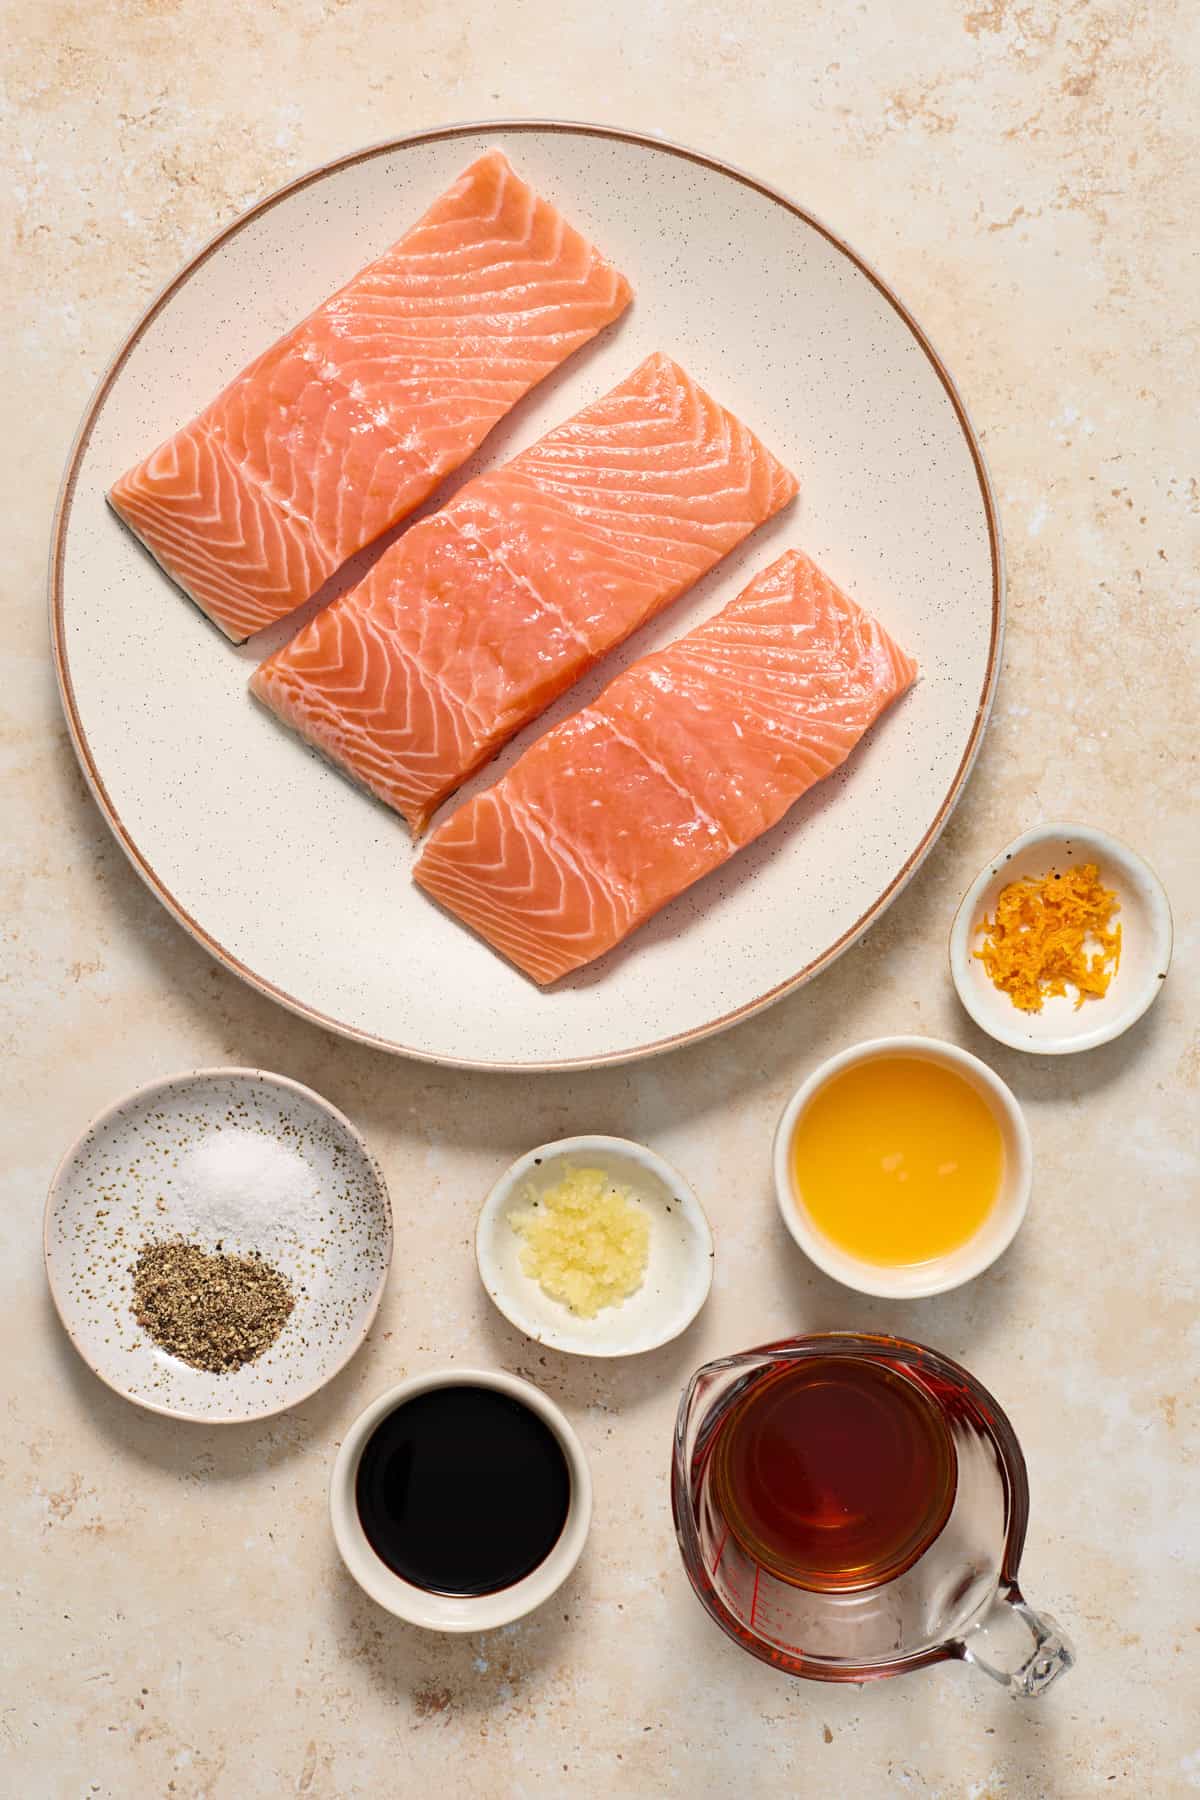 Salmon, orange zest, maple syrup and other ingredients arranged on surface to make glazed salmon.